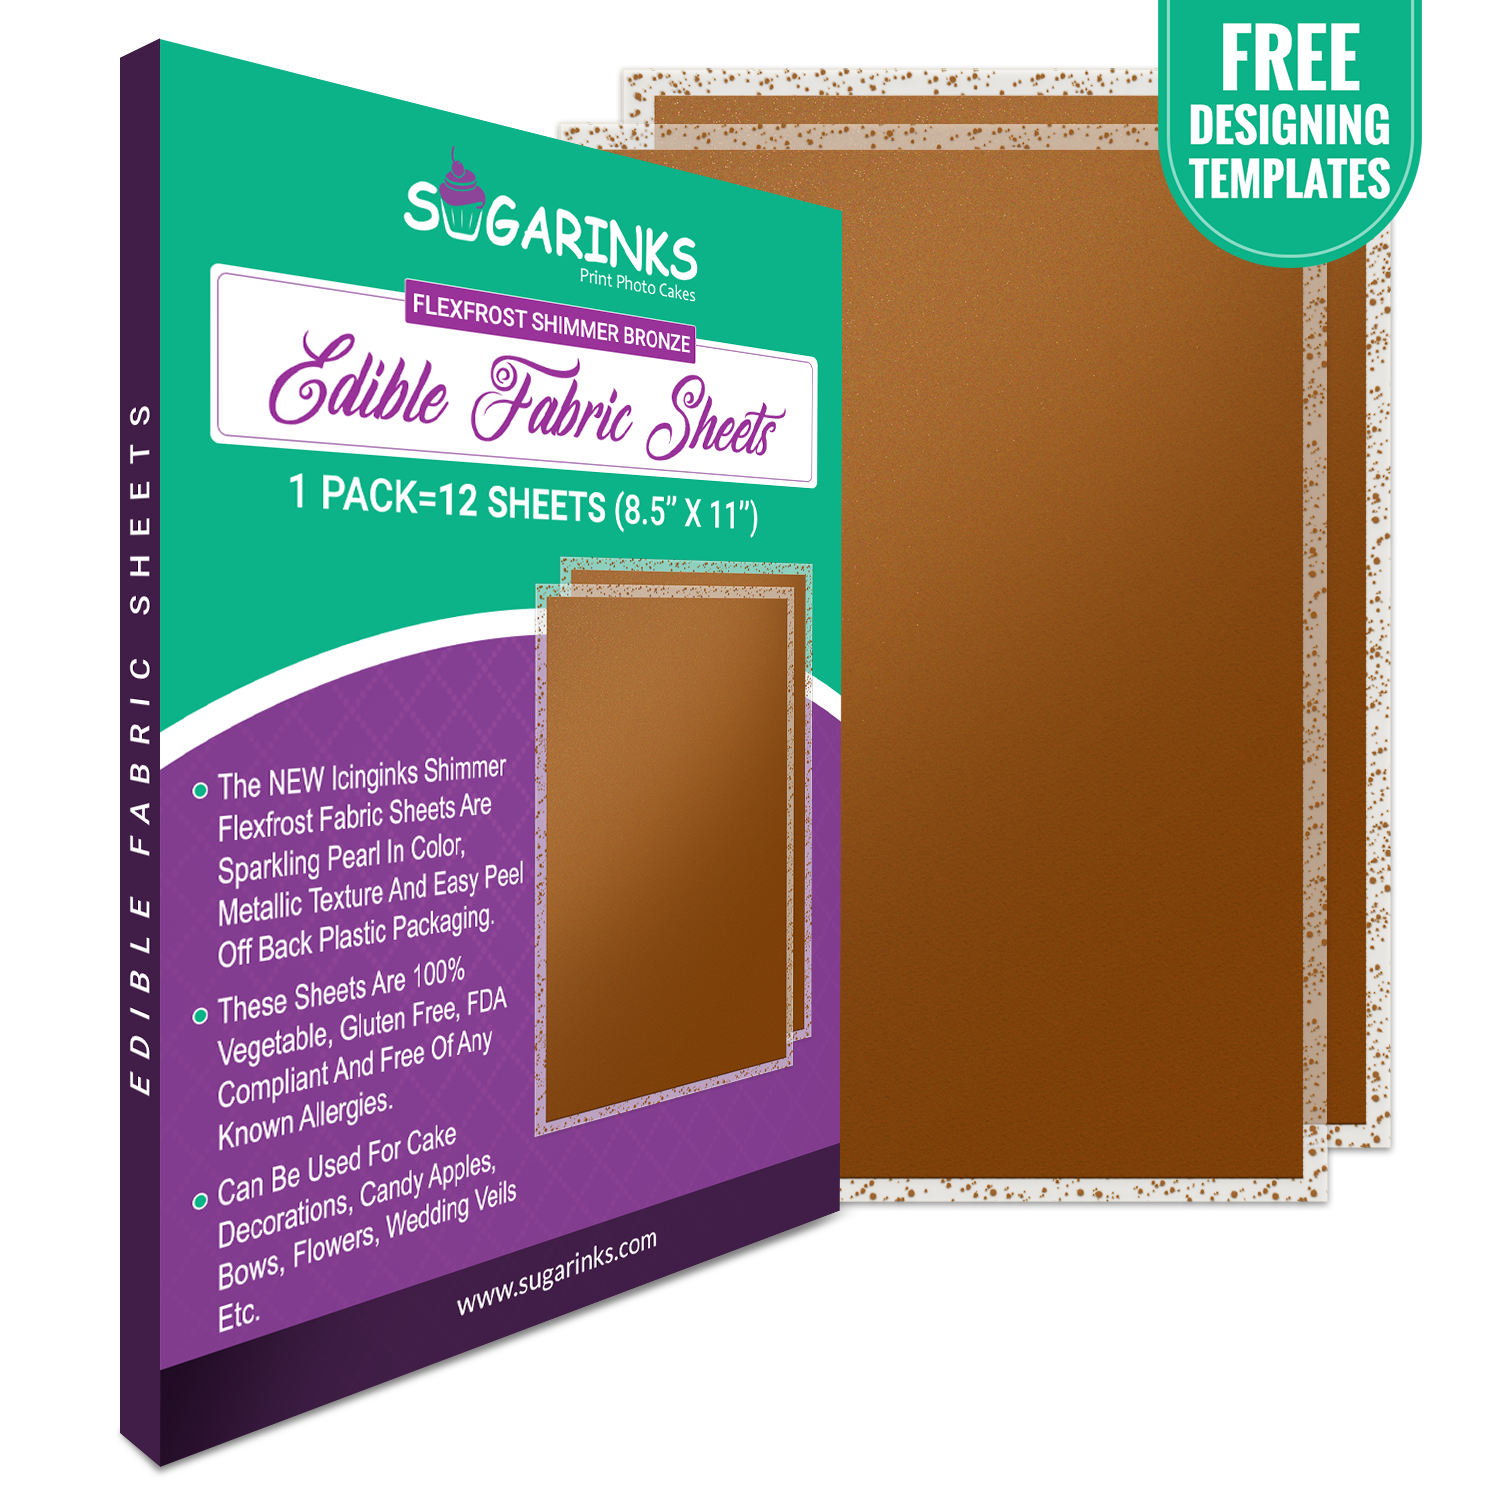 Sugarinks Premium Quality Flexfrost Shimmer Edible Fabric Sheets A4 Size (8.5”X11”) Pack of 12 – Sparkling Bronze